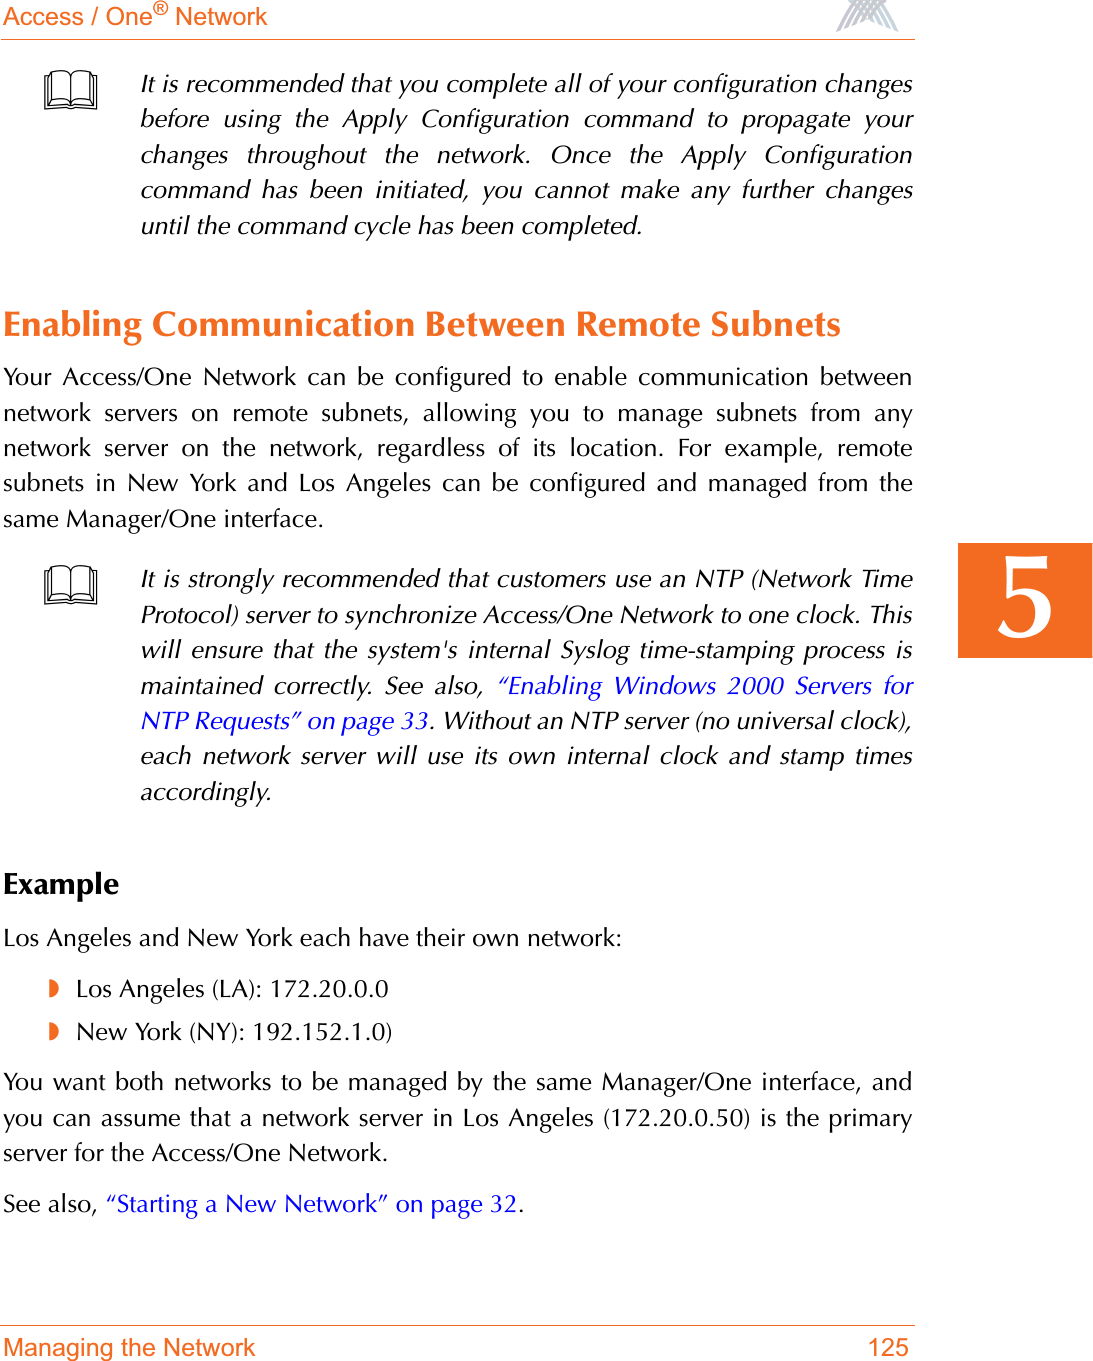 Access / One® NetworkManaging the Network 1255Enabling Communication Between Remote SubnetsYour Access/One Network can be configured to enable communication betweennetwork servers on remote subnets, allowing you to manage subnets from anynetwork server on the network, regardless of its location. For example, remotesubnets in New York and Los Angeles can be configured and managed from thesame Manager/One interface.ExampleLos Angeles and New York each have their own network:◗Los Angeles (LA): 172.20.0.0◗New York (NY): 192.152.1.0)You want both networks to be managed by the same Manager/One interface, andyou can assume that a network server in Los Angeles (172.20.0.50) is the primaryserver for the Access/One Network.See also, “Starting a New Network” on page 32.It is recommended that you complete all of your configuration changesbefore using the Apply Configuration command to propagate yourchanges throughout the network. Once the Apply Configurationcommand has been initiated, you cannot make any further changesuntil the command cycle has been completed.It is strongly recommended that customers use an NTP (Network TimeProtocol) server to synchronize Access/One Network to one clock. Thiswill ensure that the system&apos;s internal Syslog time-stamping process ismaintained correctly. See also, “Enabling Windows 2000 Servers forNTP Requests” on page 33. Without an NTP server (no universal clock),each network server will use its own internal clock and stamp timesaccordingly.